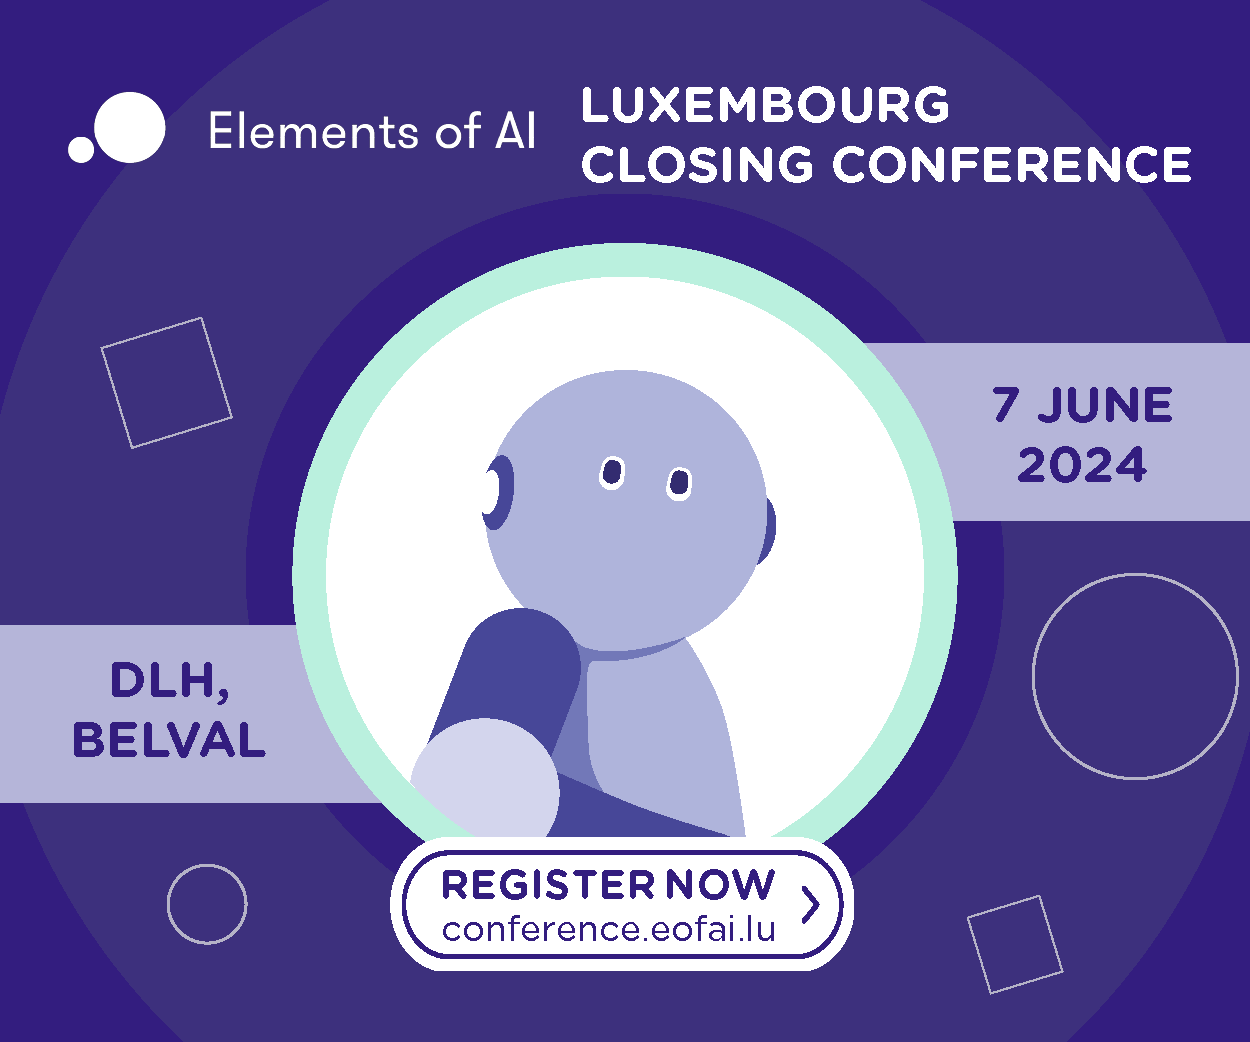 Introducing the Elements of AI, Luxembourg Closing Conference